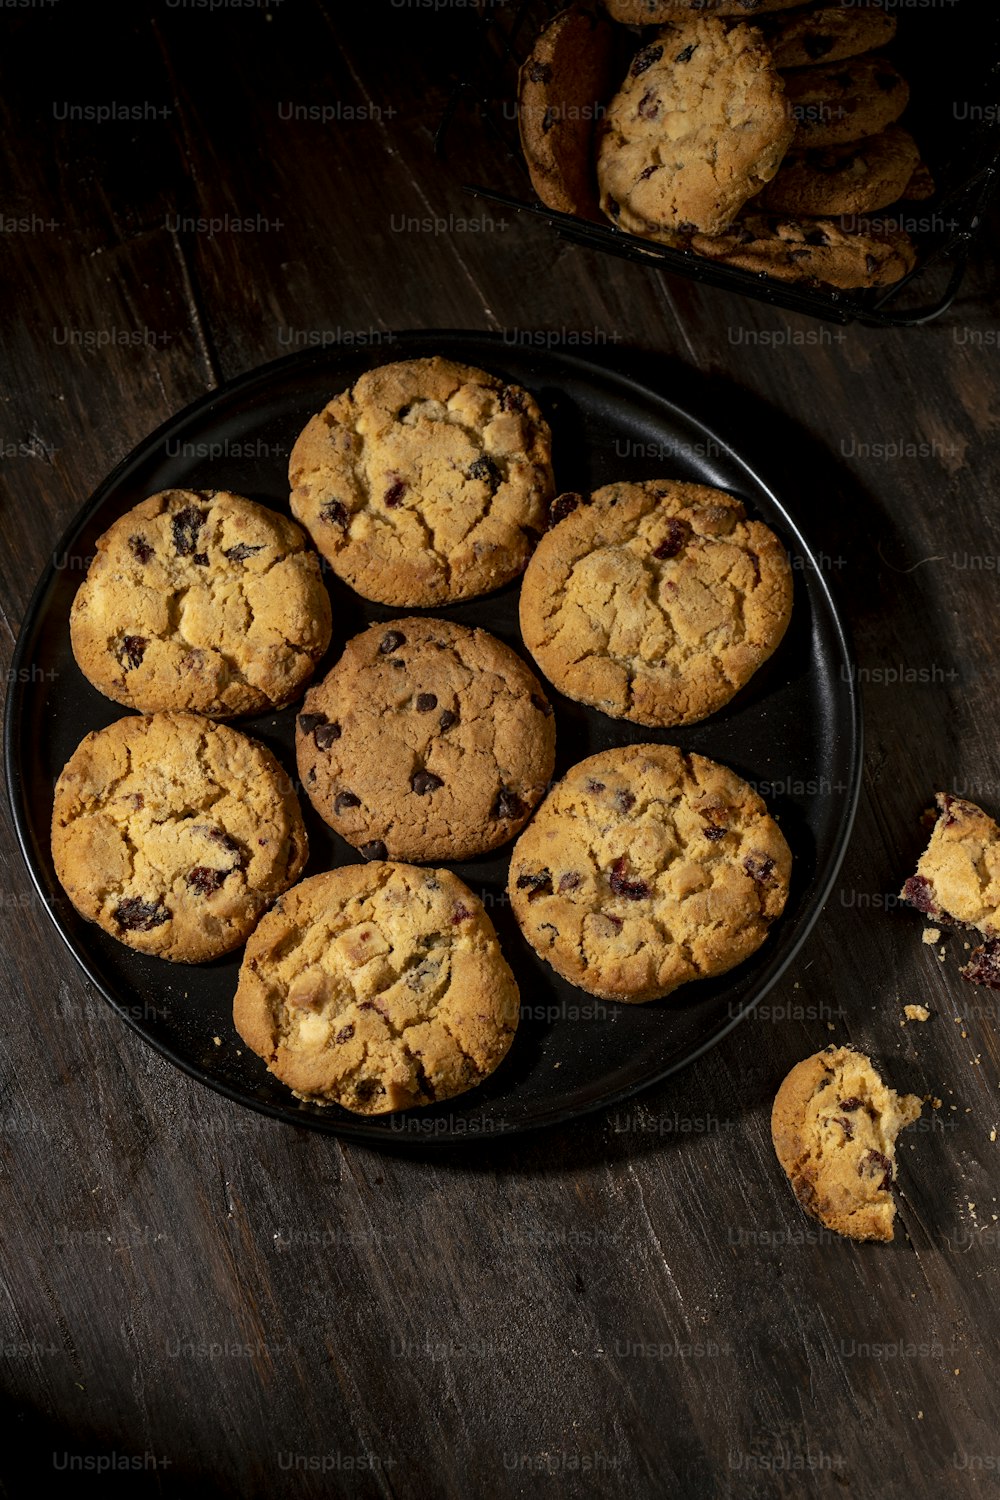 a plate of chocolate chip cookies on a wooden table